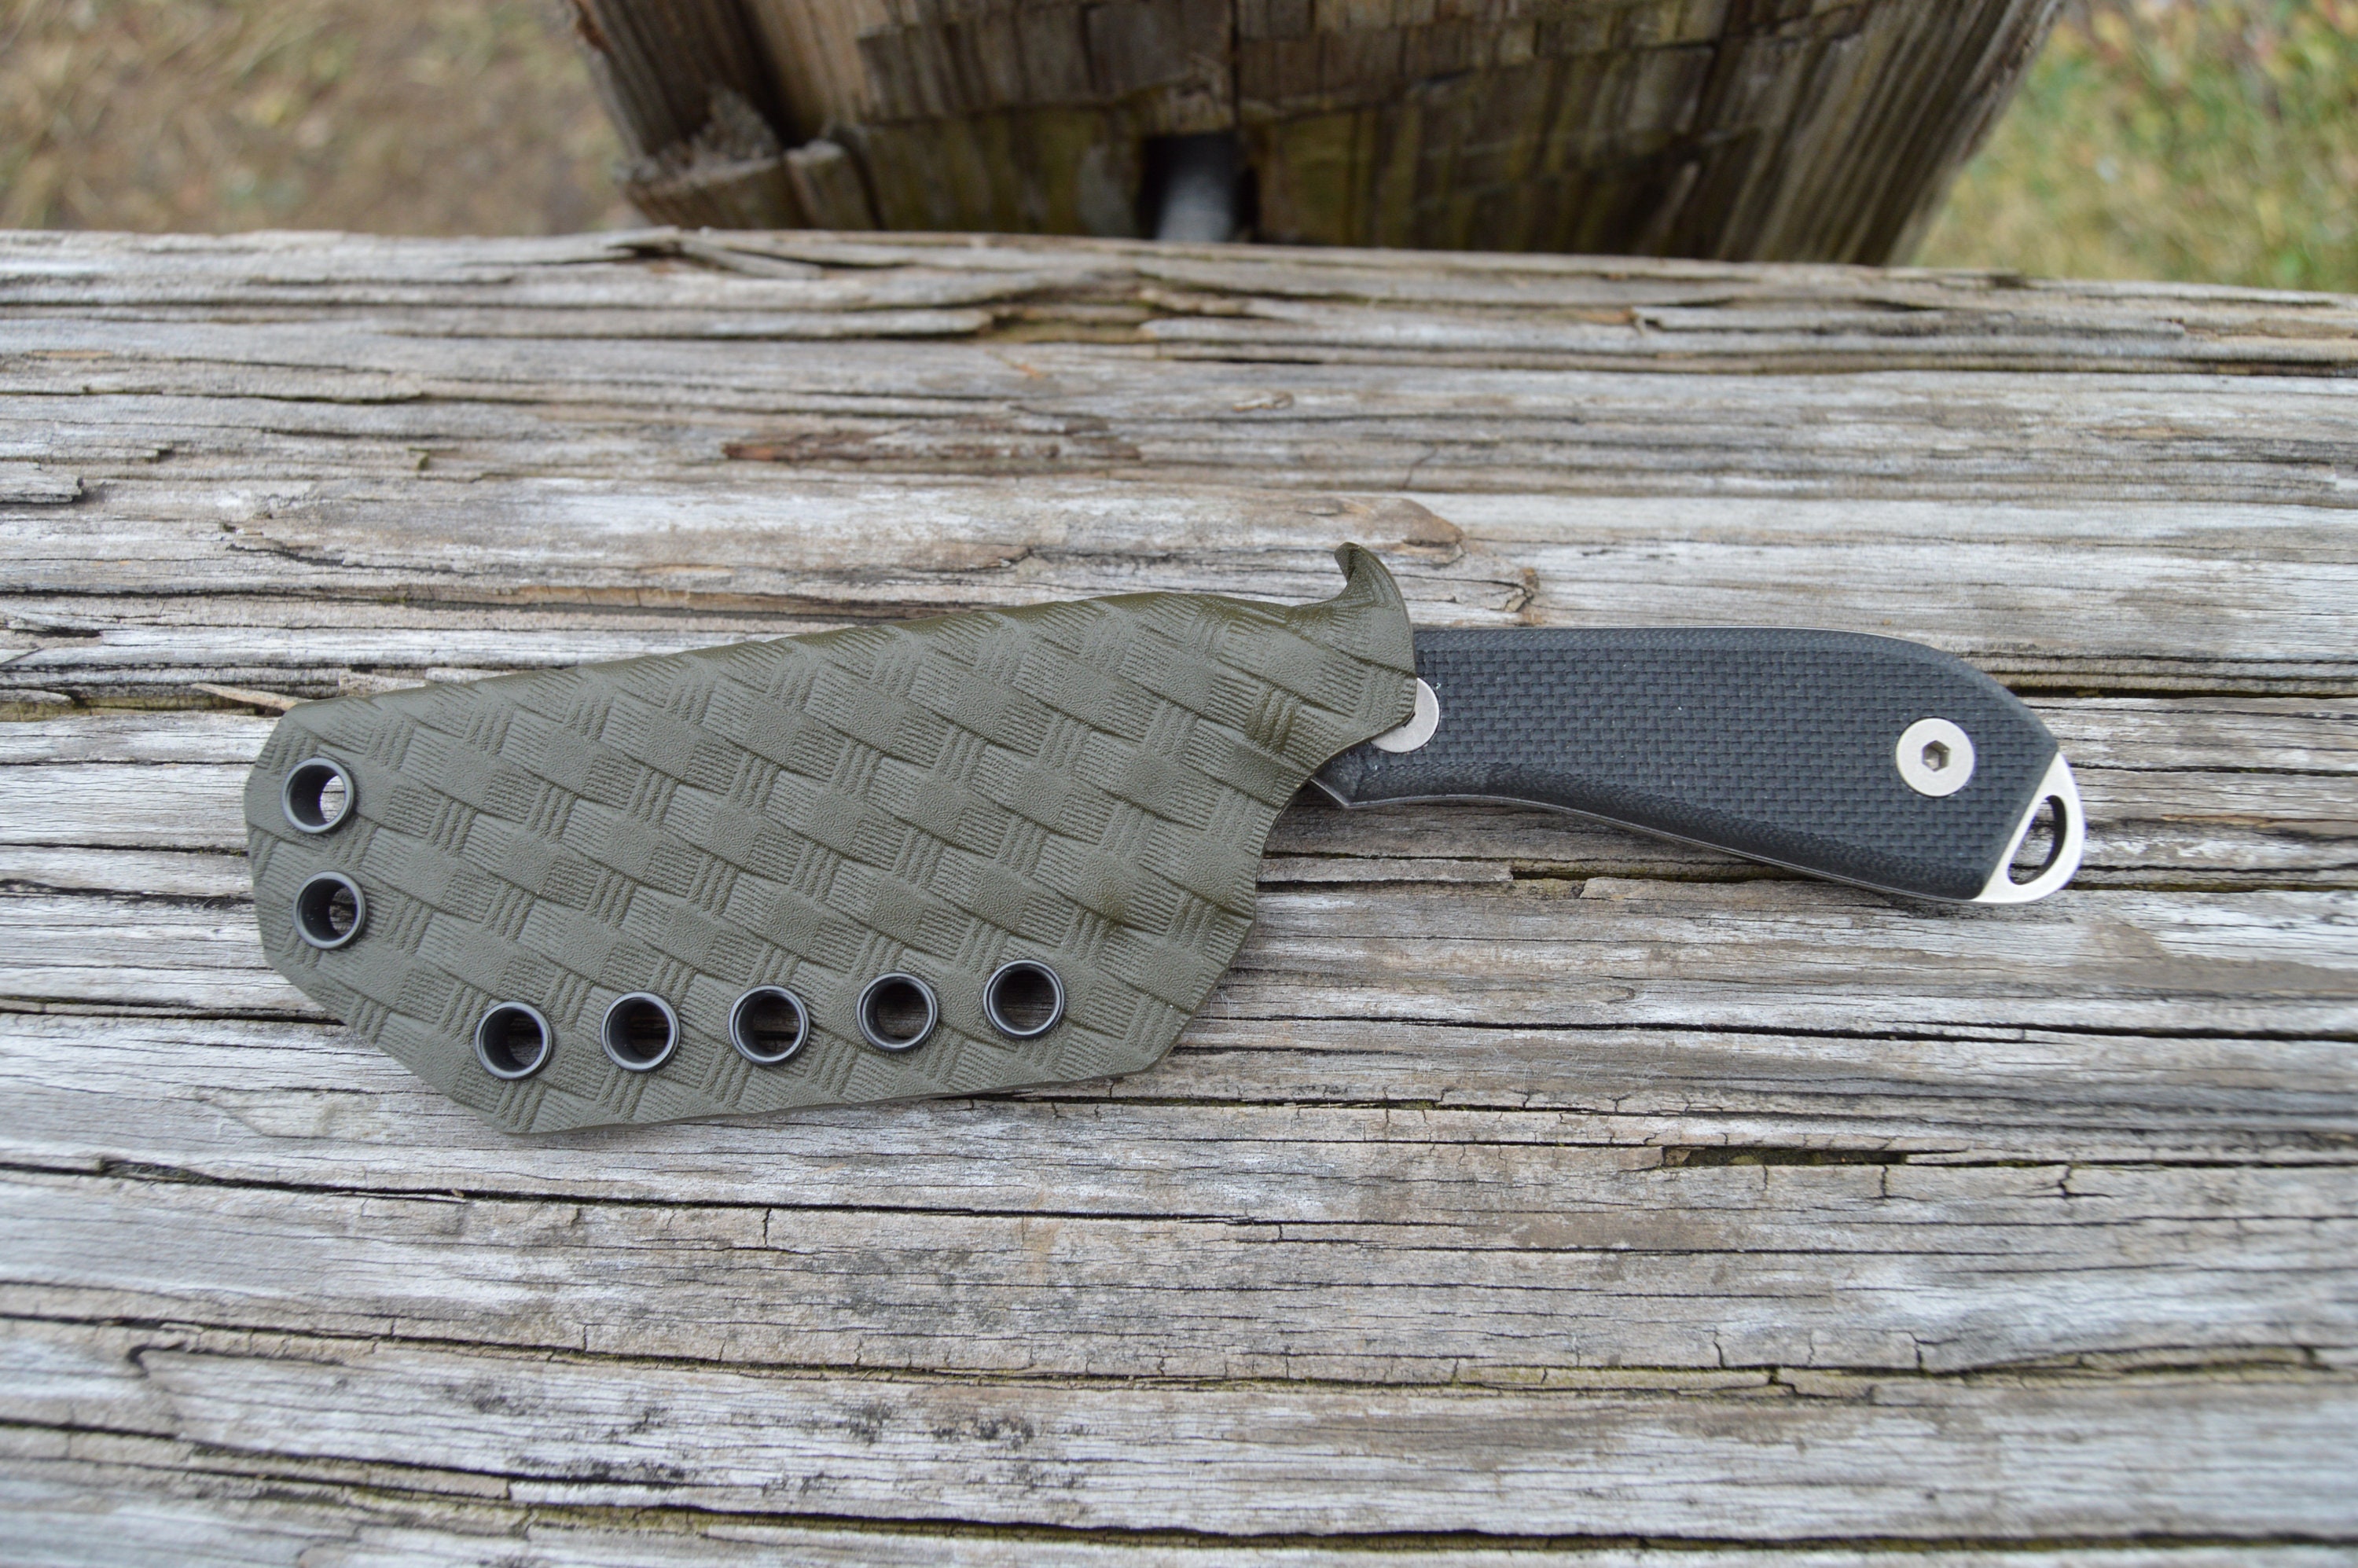 Backpacker G10 Handle Scales - White River Knife and Tool